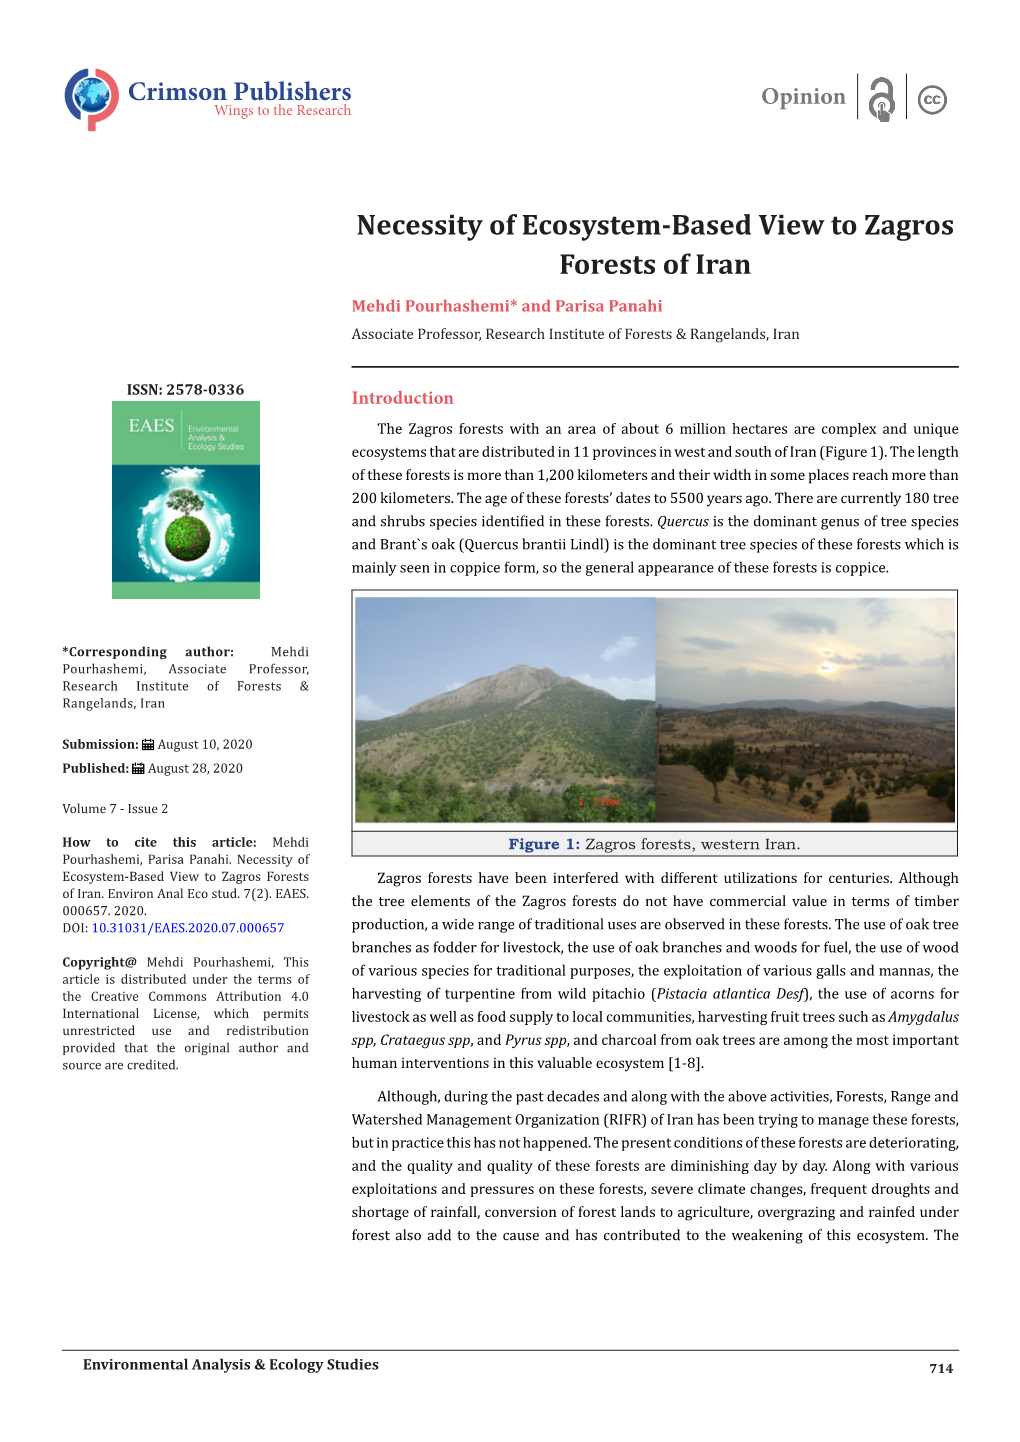 Necessity of Ecosystem-Based View to Zagros Forests of Iran Mehdi Pourhashemi* and Parisa Panahi Associate Professor, Research Institute of Forests & Rangelands, Iran